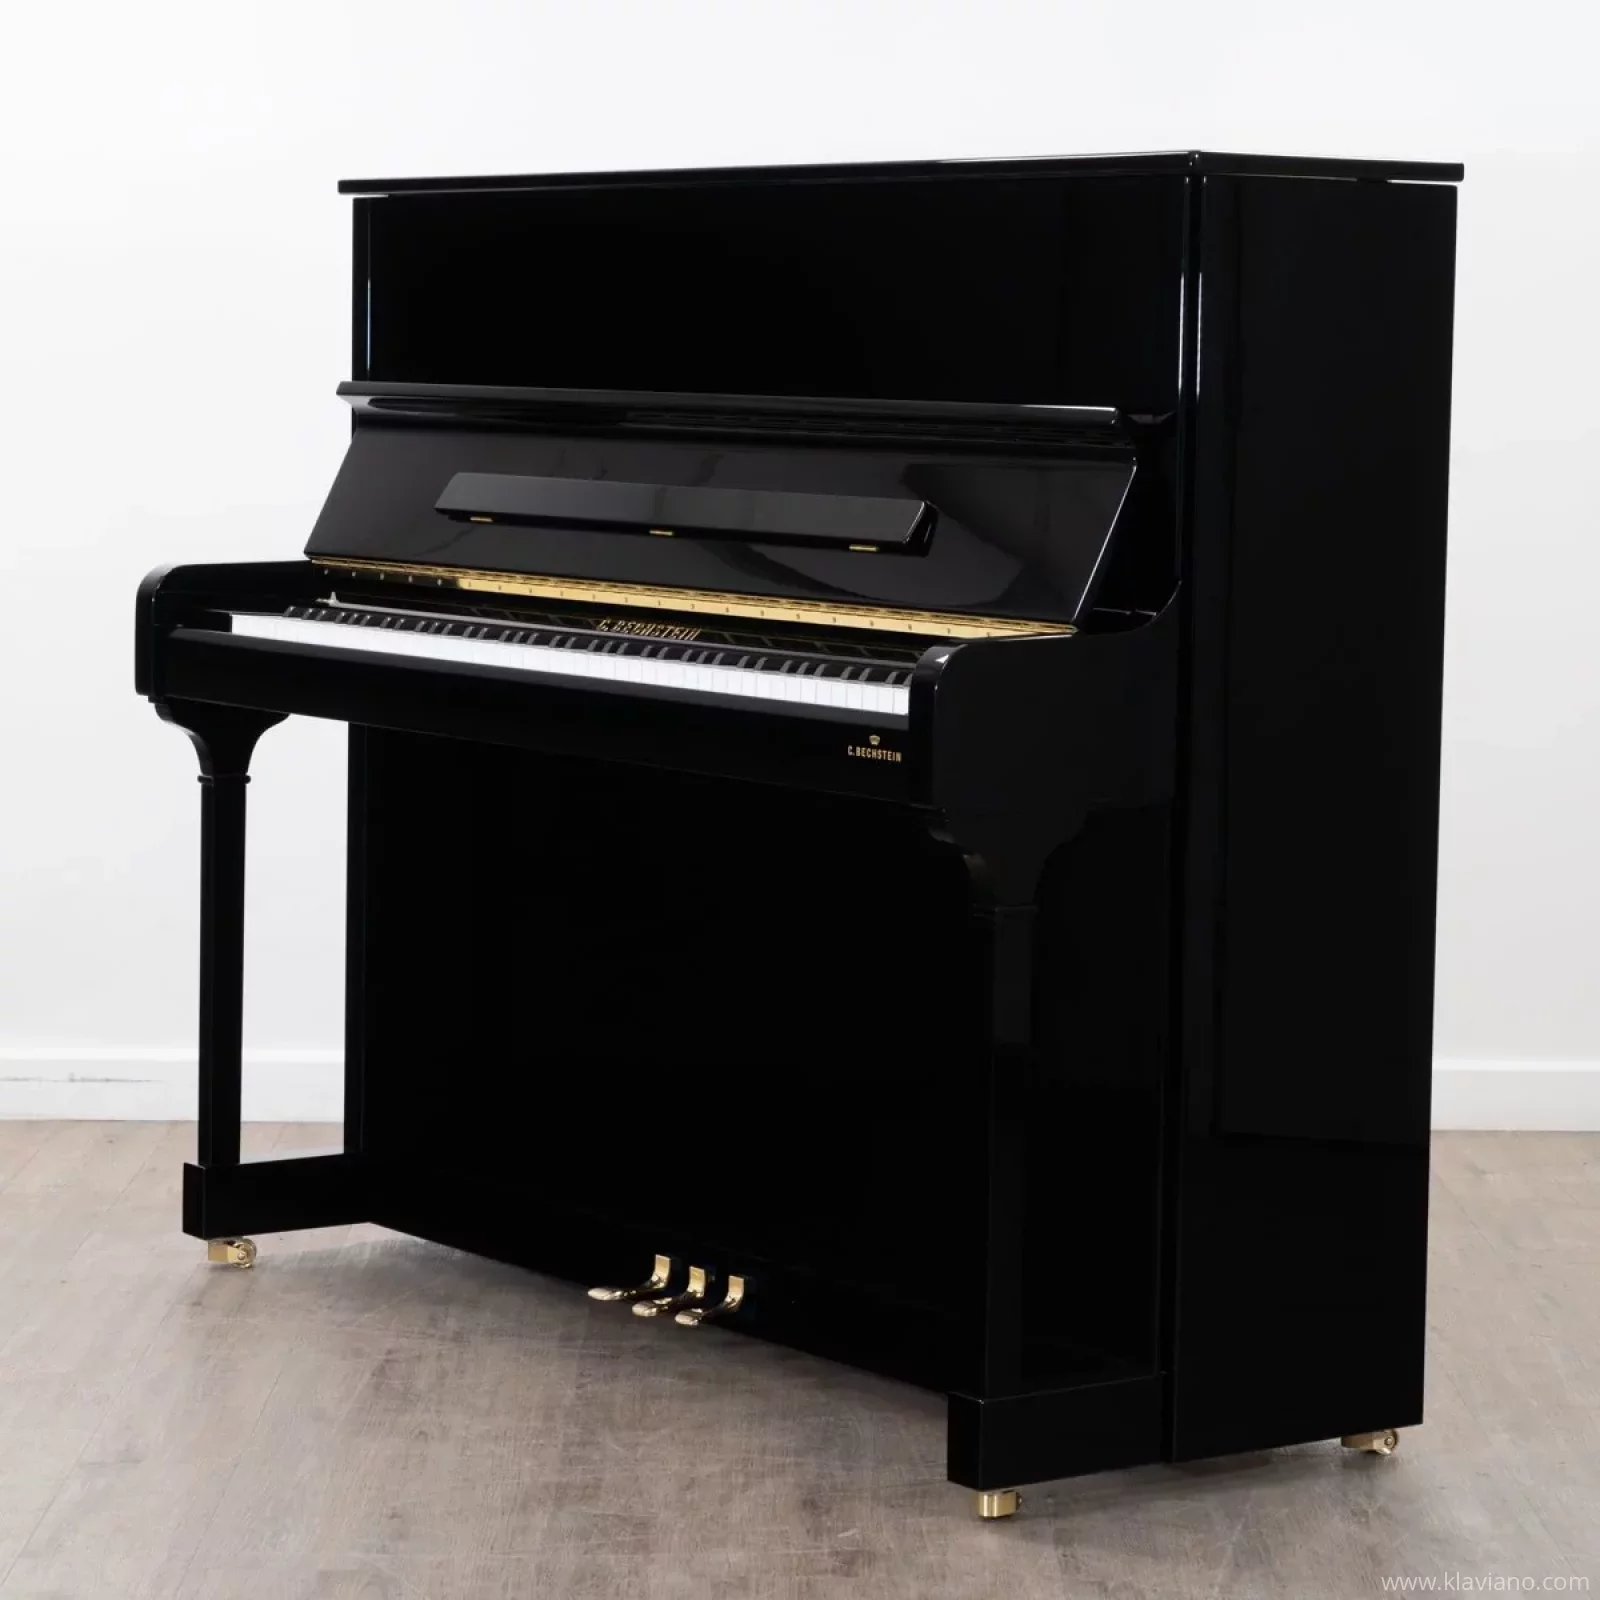 Used, C. Bechstein, A 124 (B 124) Imposant